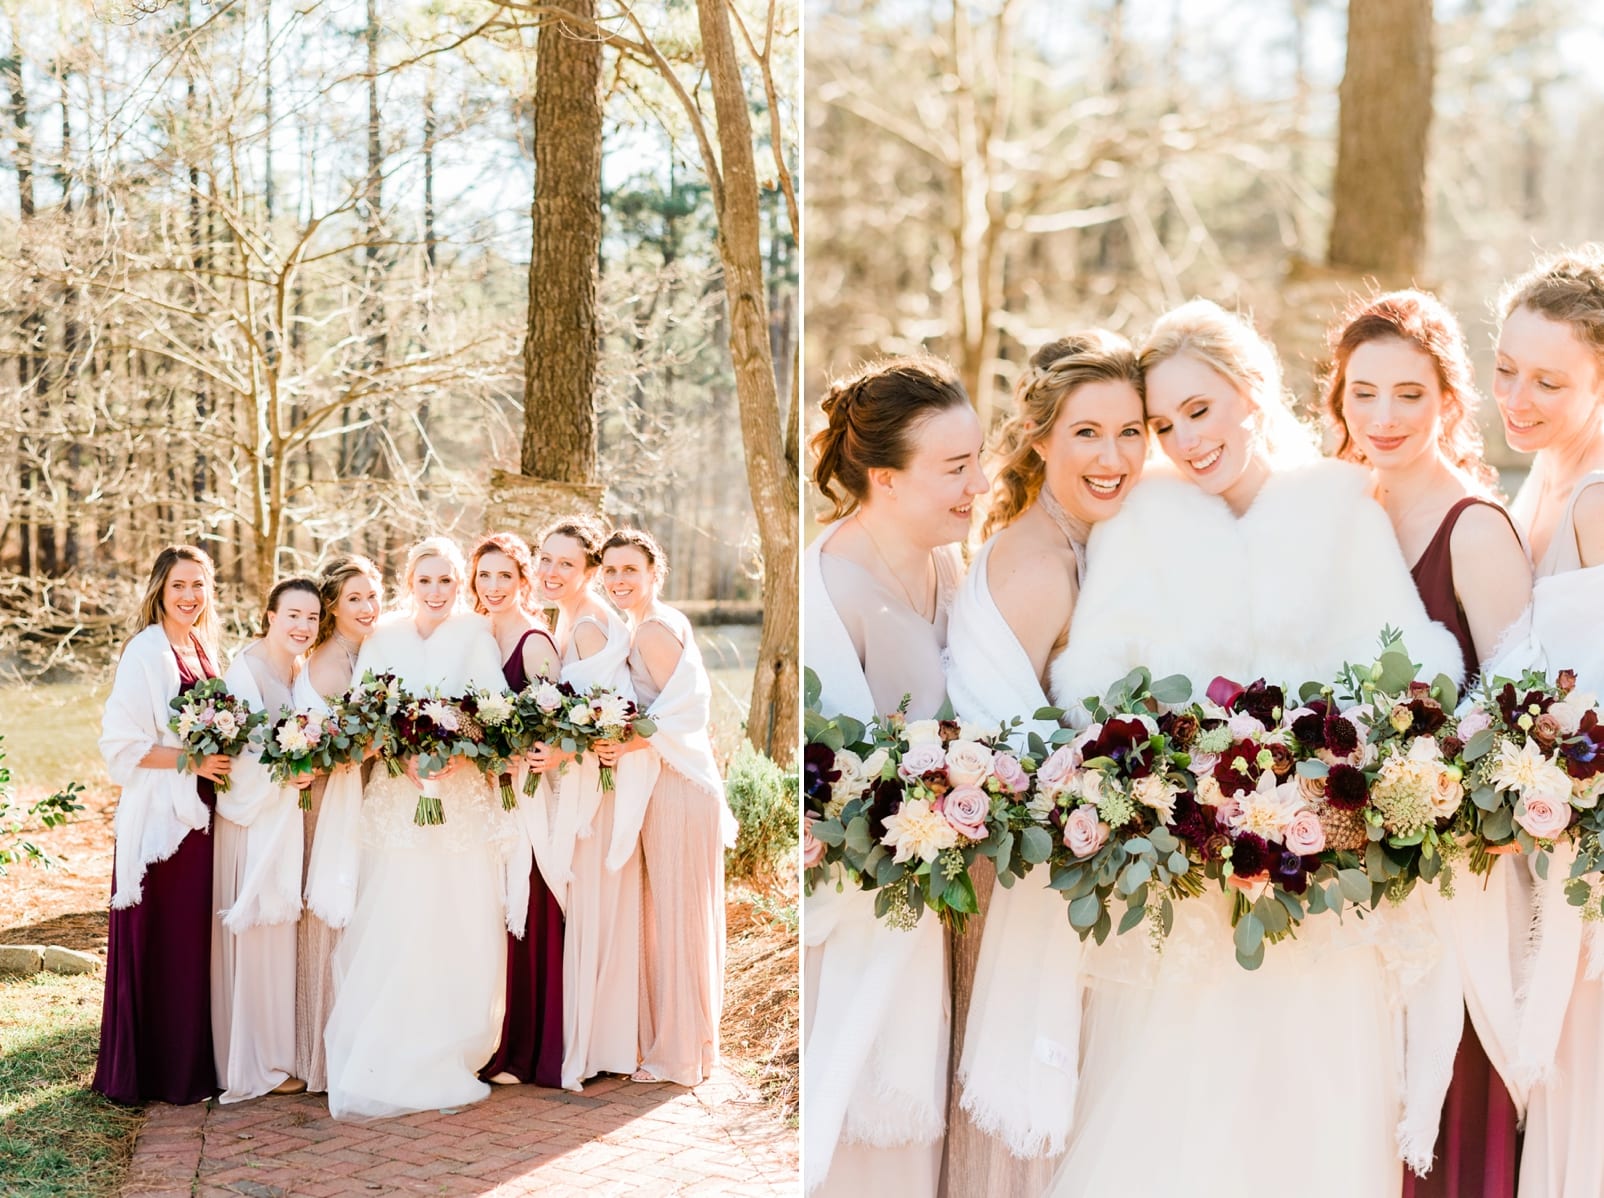 Angus Barn bride with her bridesmaids in long light pink and maroon dresses from Show Me Your Mumu photo